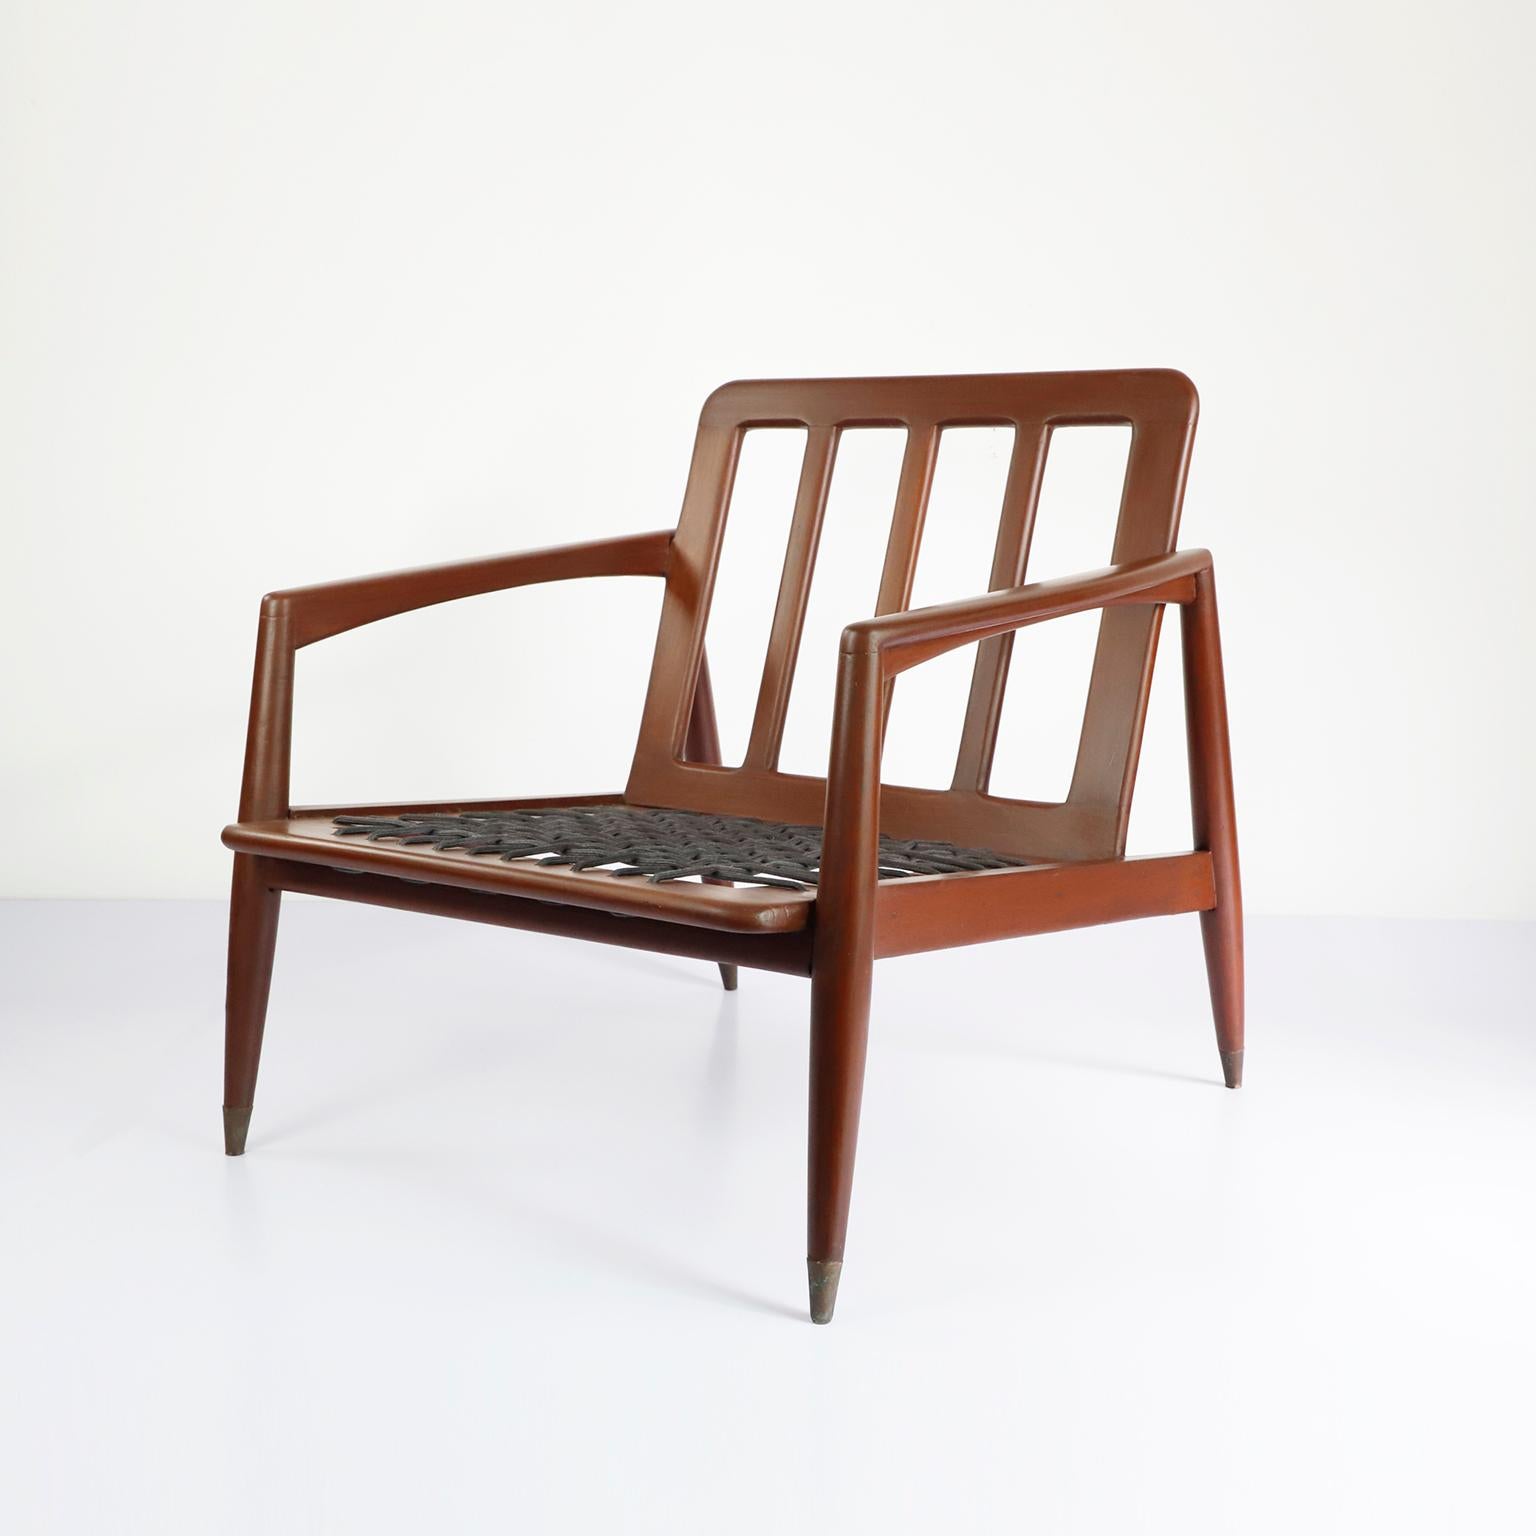 A rare set of two armchairs attributed to Charles Allen for Regil de Yucatan in 1952 in fantastic mahogany wood and brass details.


Charles W. Allen.

Charles W. Allen was an American interior designer who worked for Regil de Yucatán, a